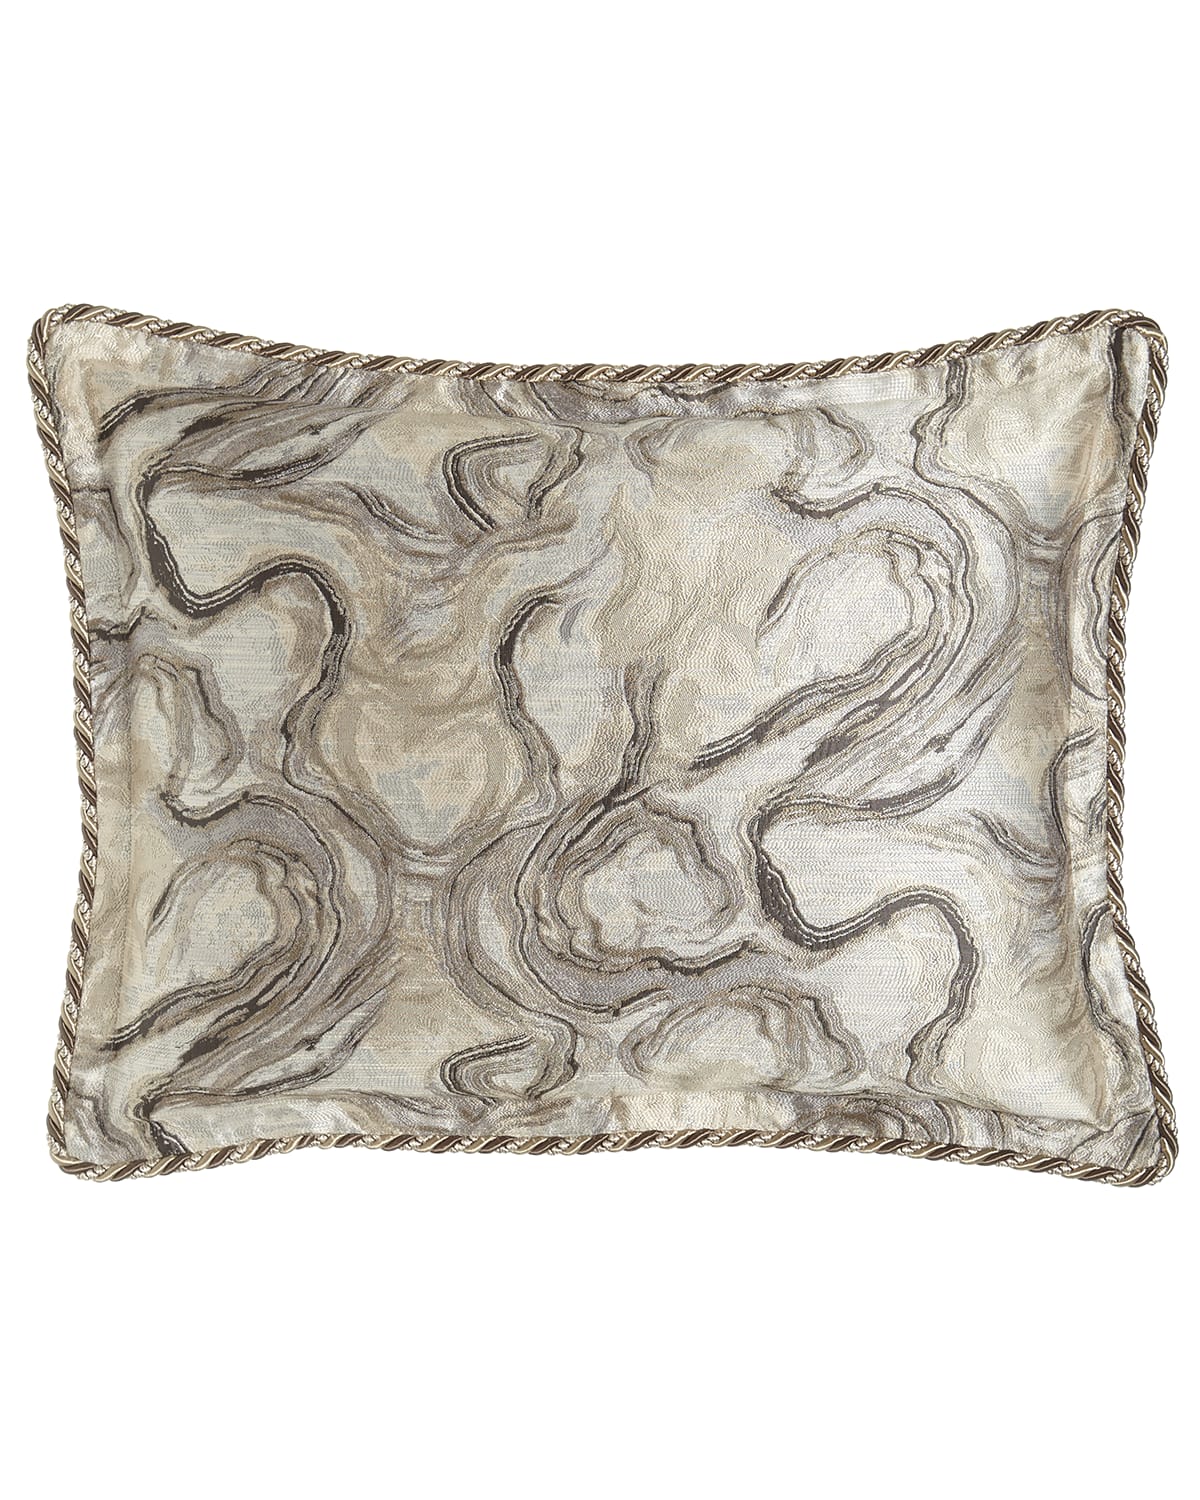 Image Dian Austin Couture Home King Driftwood Sham